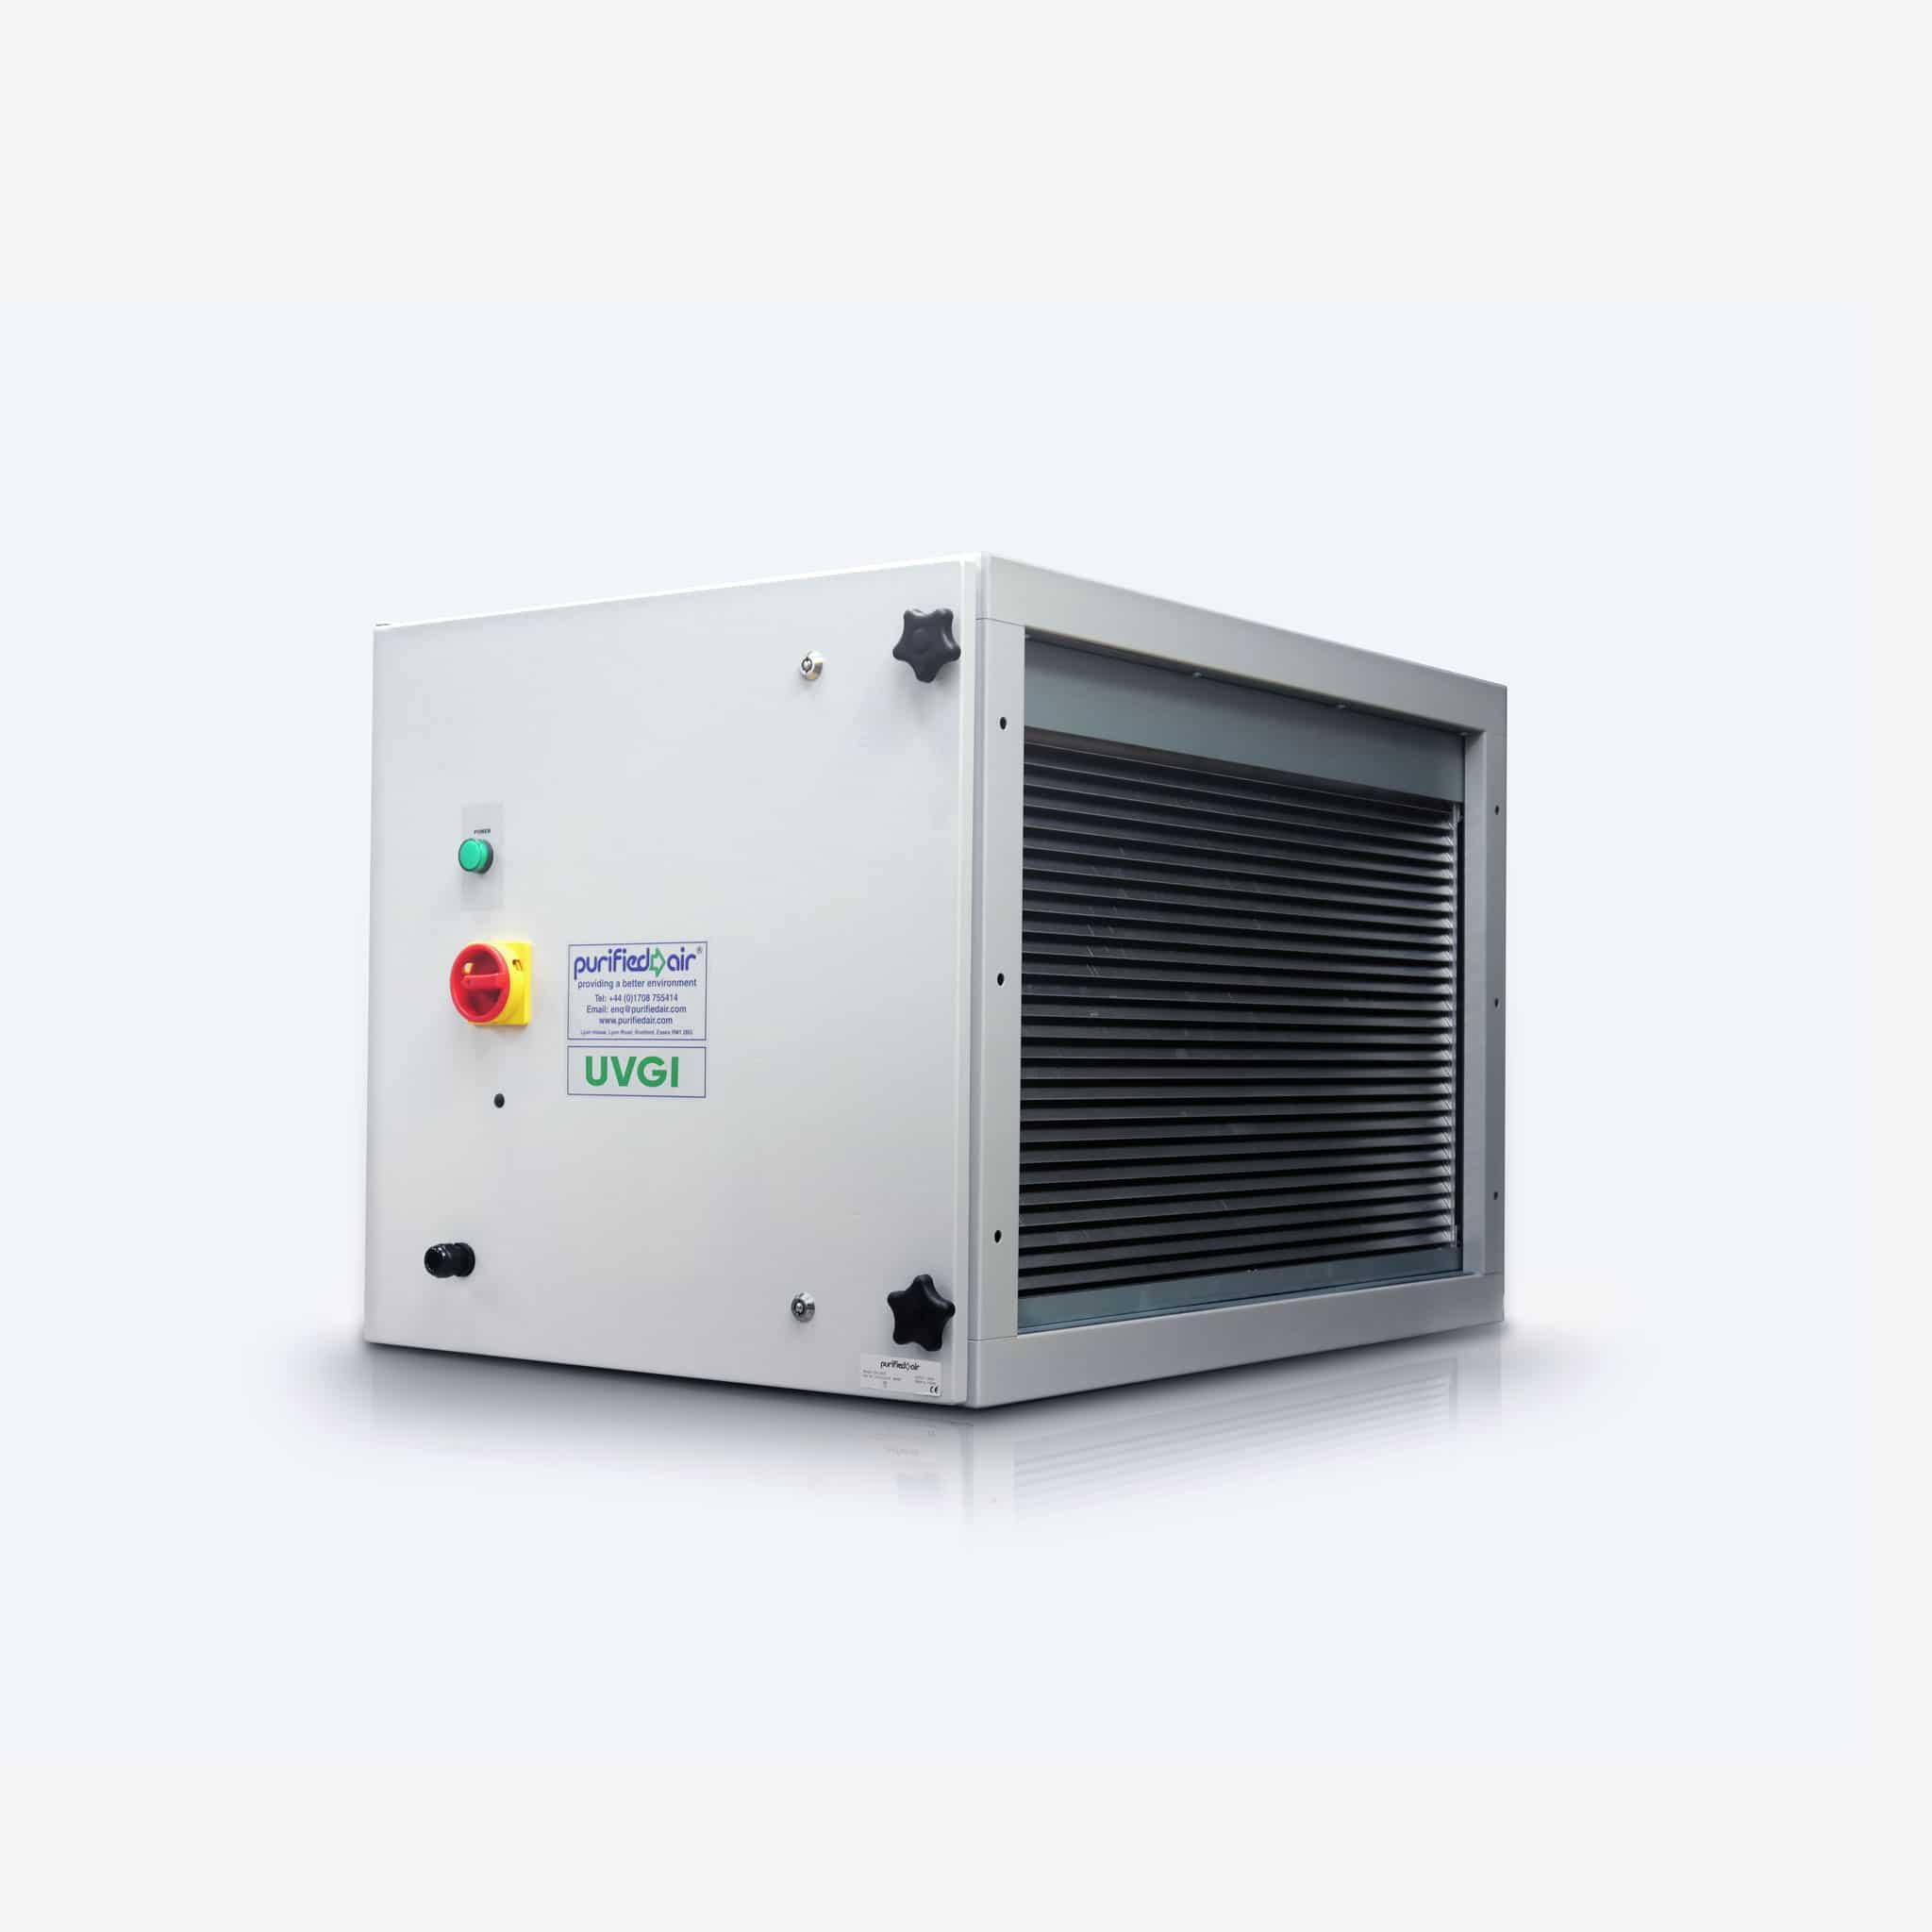 Product Commercial UVGI Air Purifier / Disinfection Systems image